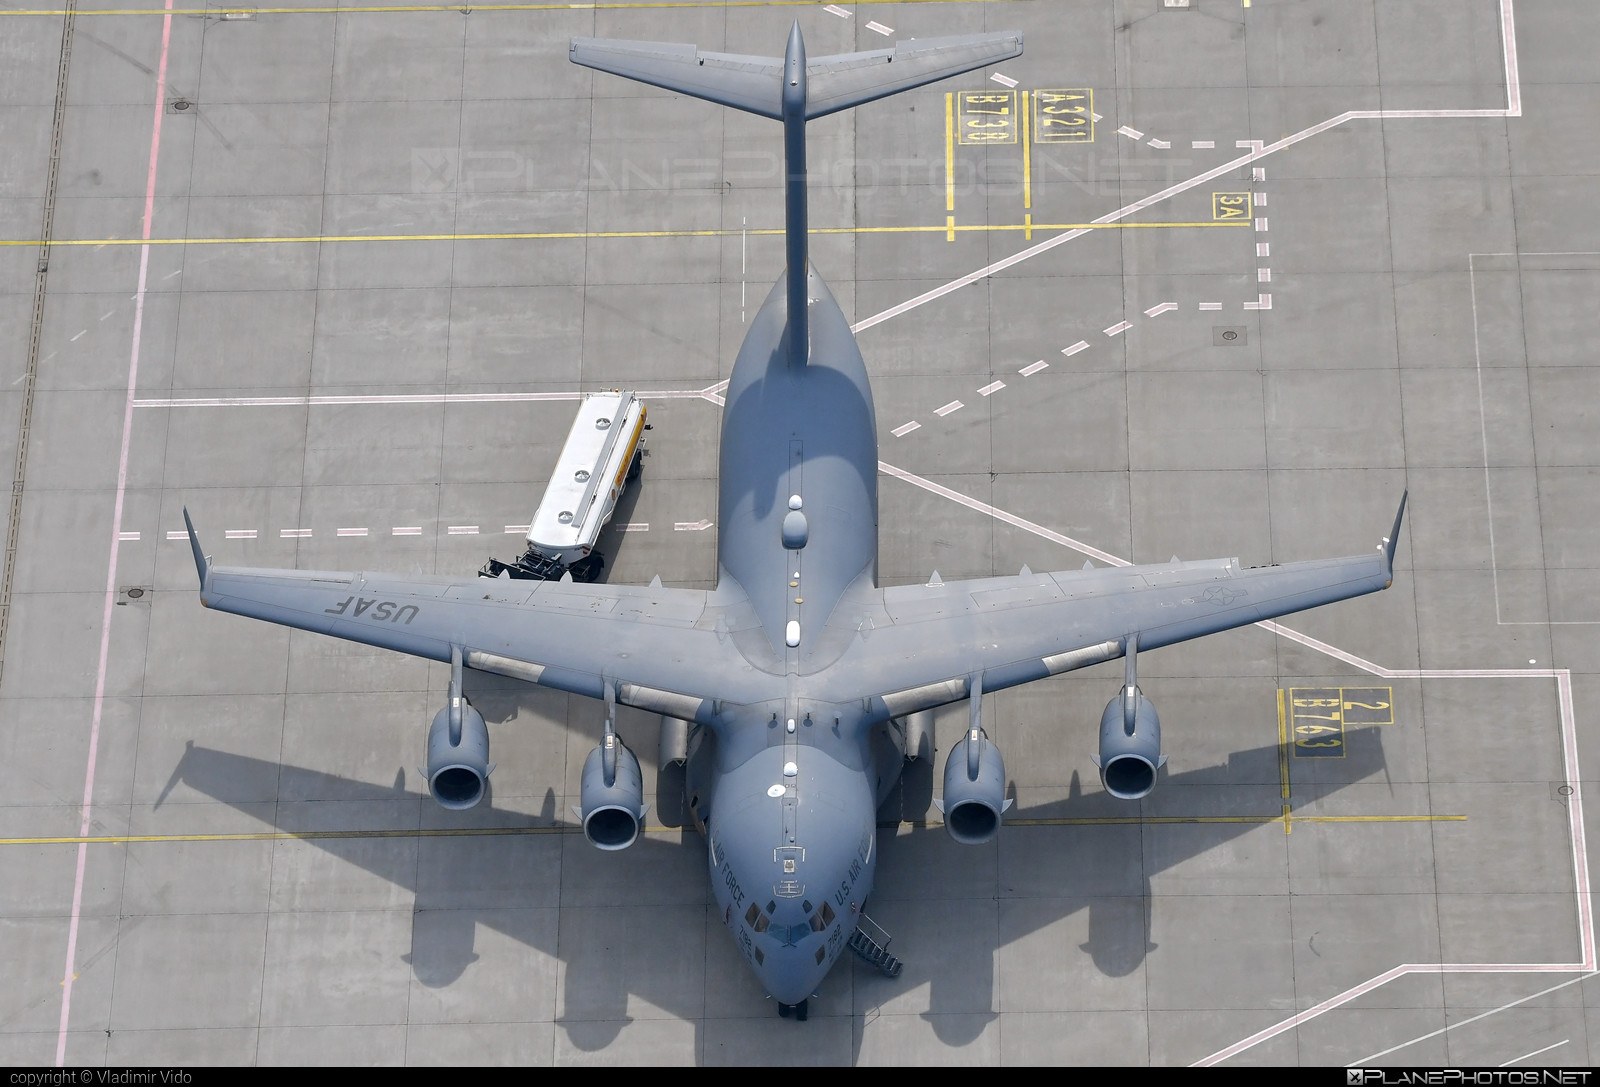 Boeing C-17A Globemaster III - 07-7182 operated by US Air Force (USAF) #boeing #c17 #c17globemaster #globemaster #globemasteriii #usaf #usairforce